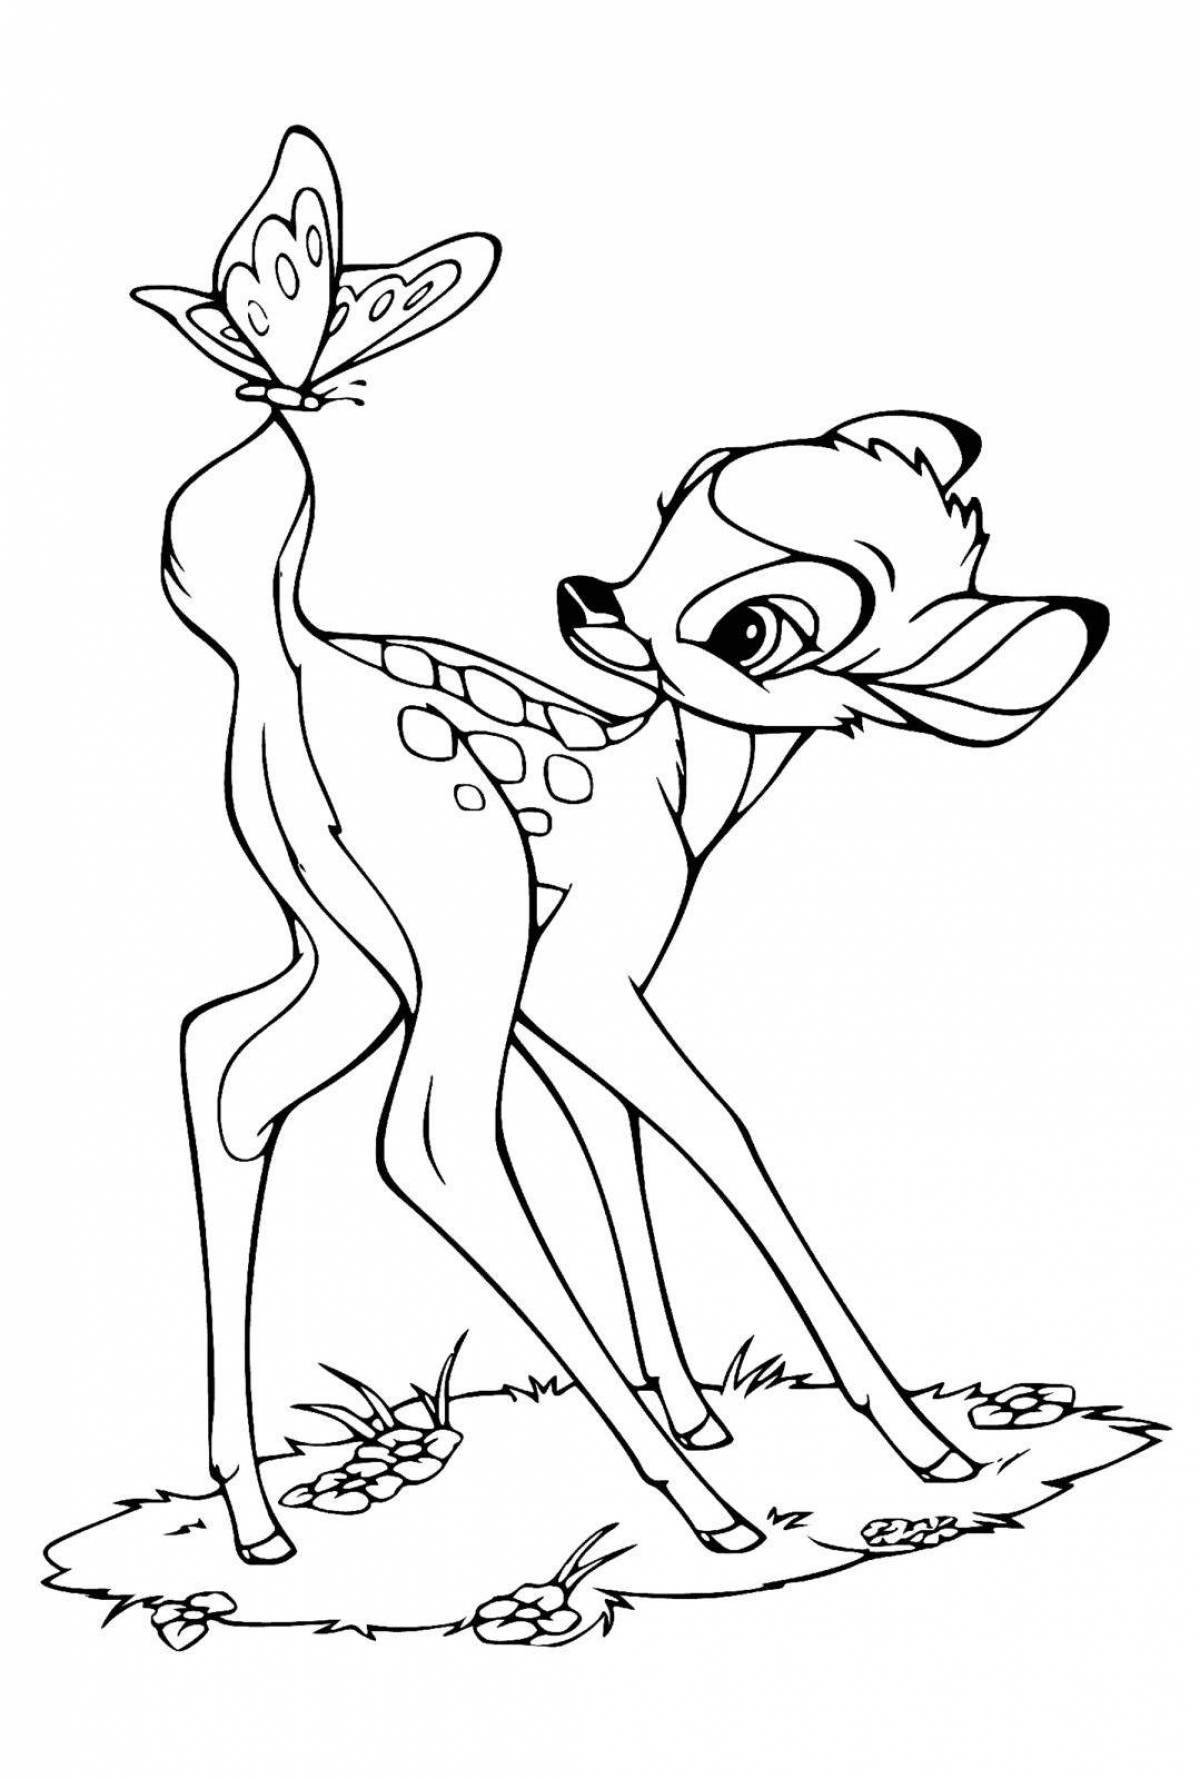 Cute bambi coloring for kids